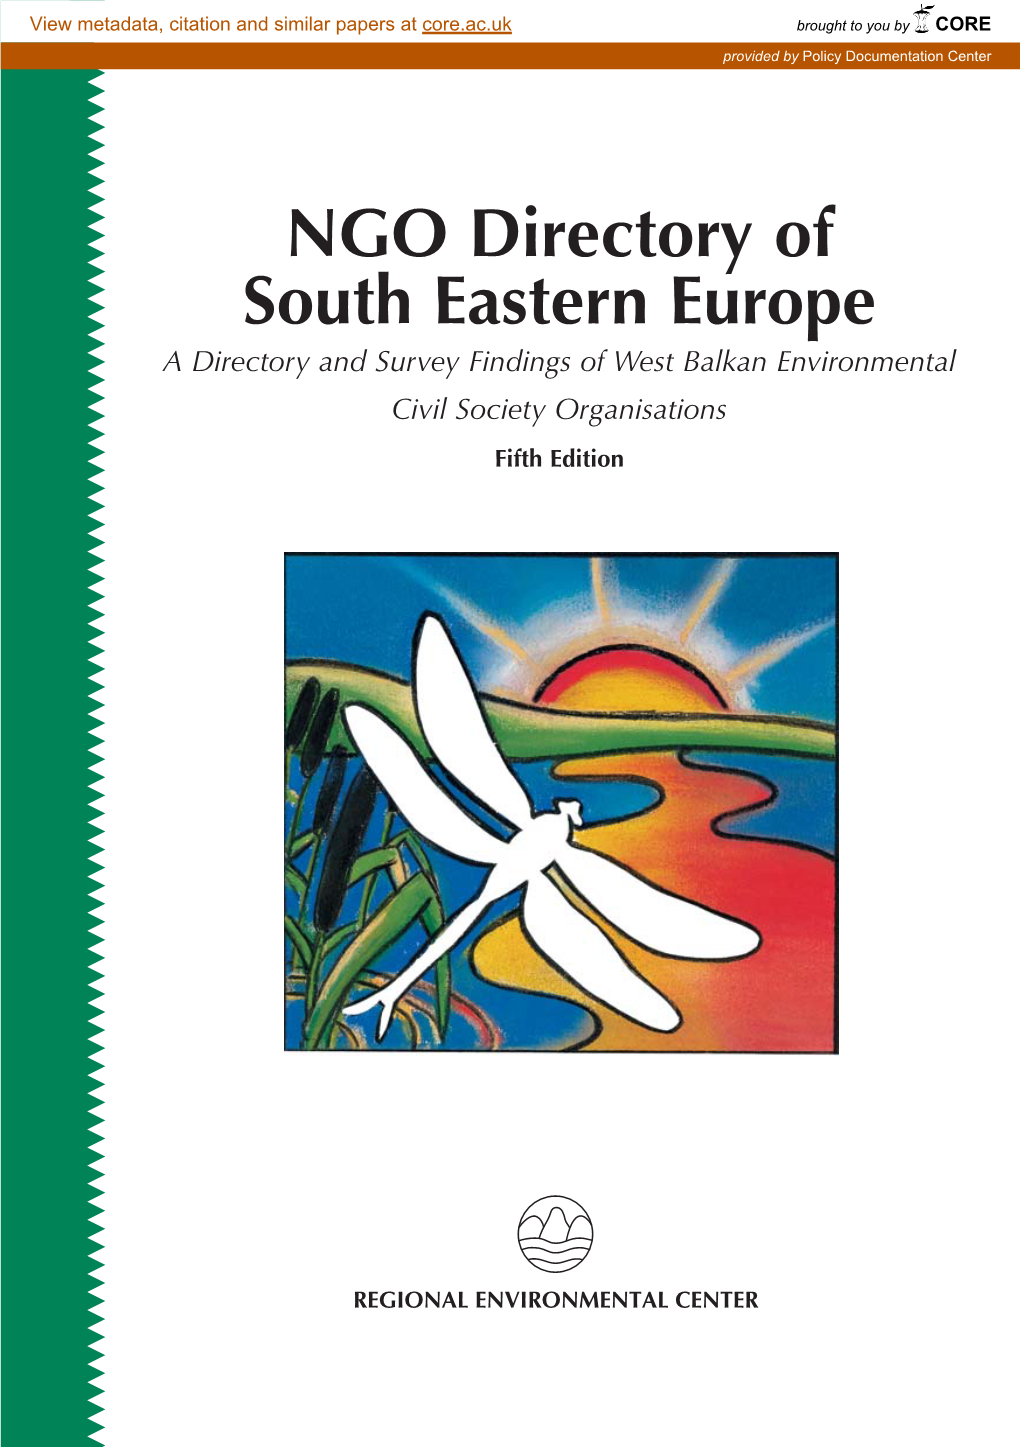 NGO Directory of South Eastern Europe